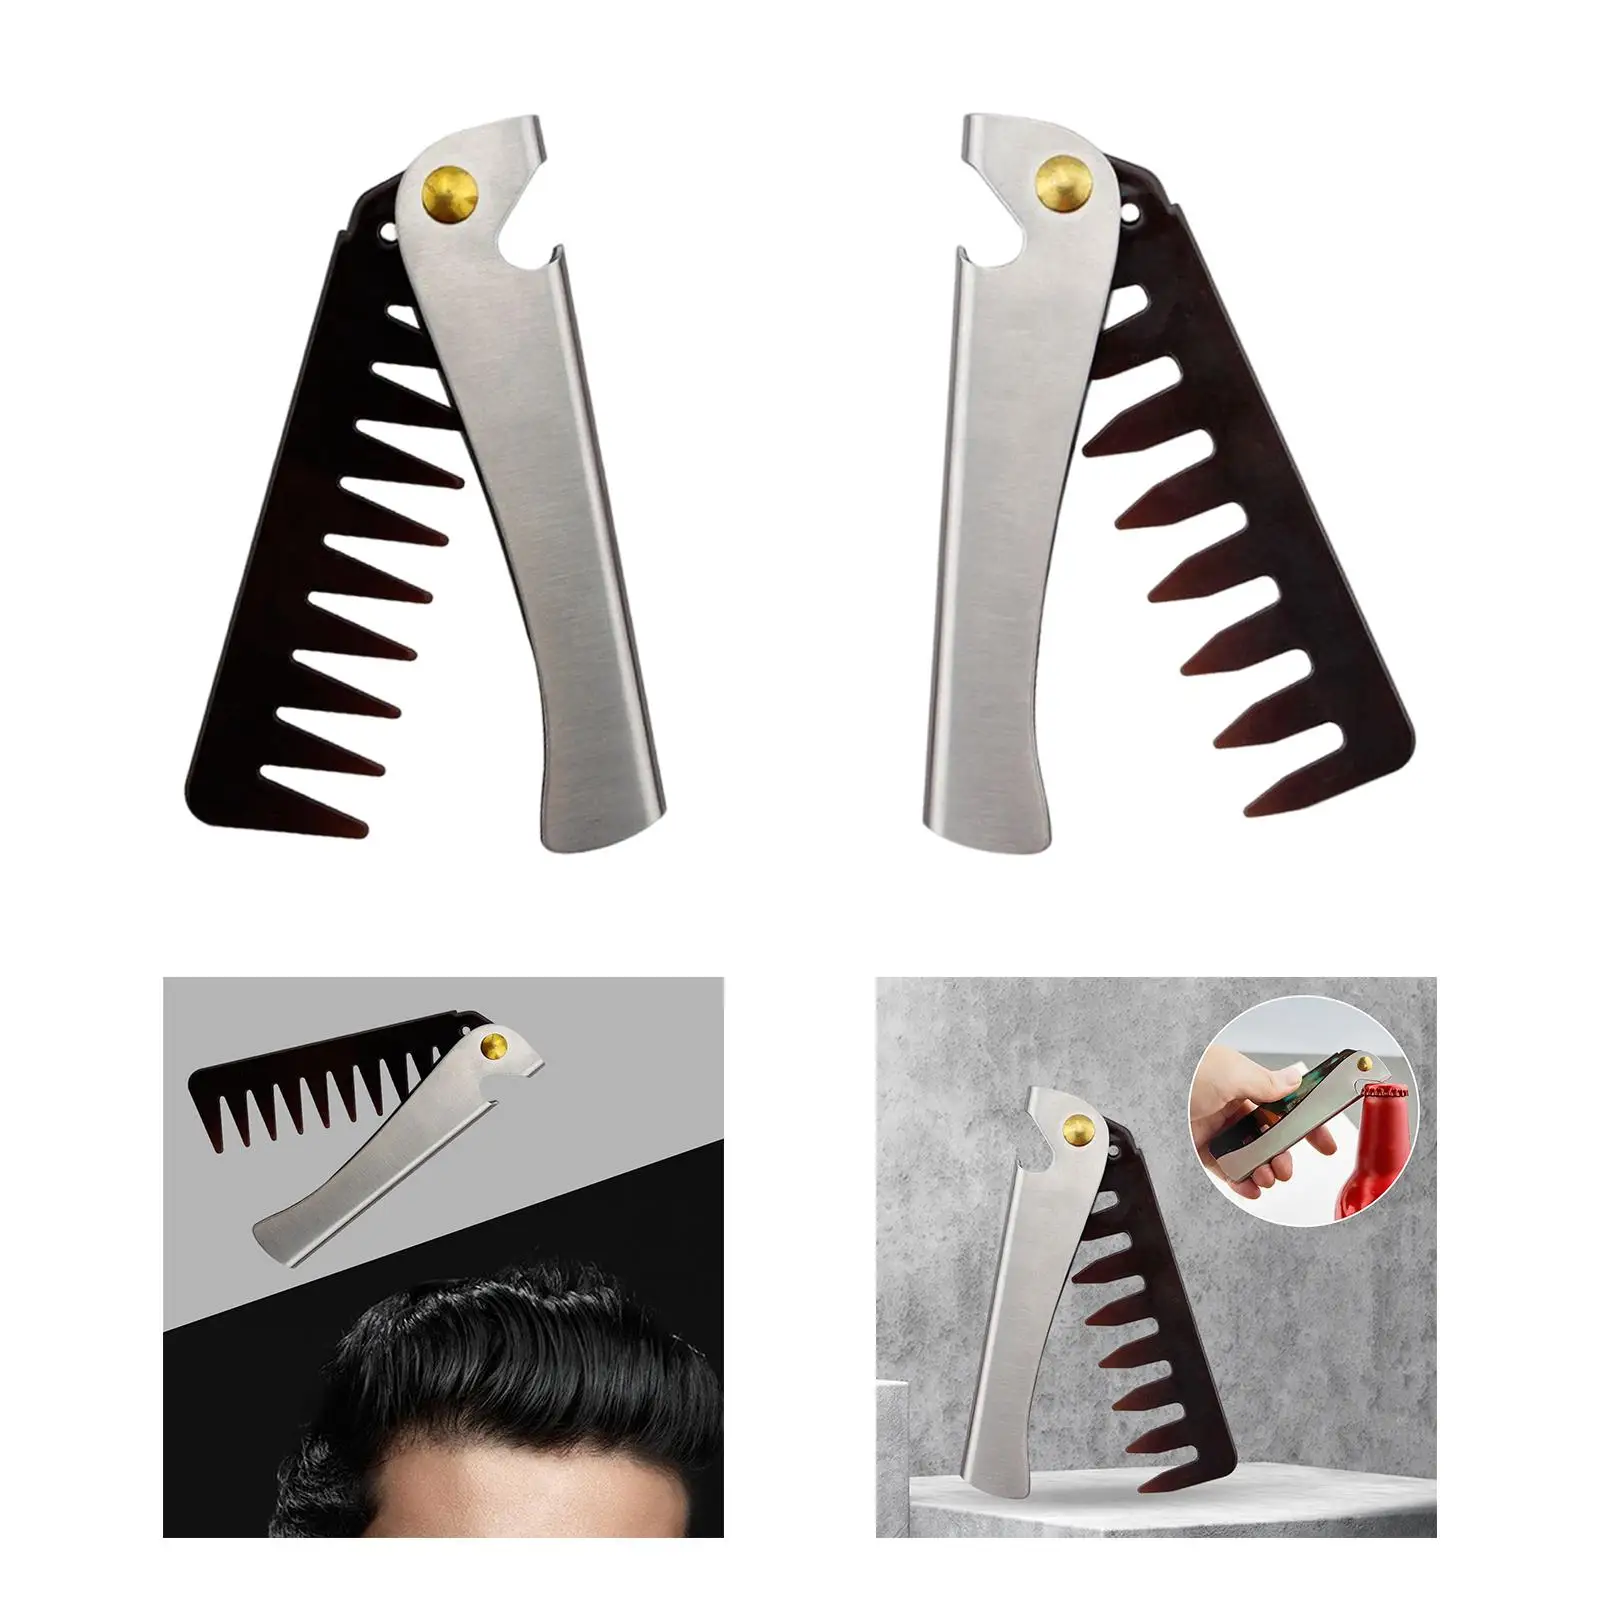 Portable Folding Beard Comb for Men Grooming Combing Hair Stainless Steel Pocket Comb for Stylists Home Use Travel